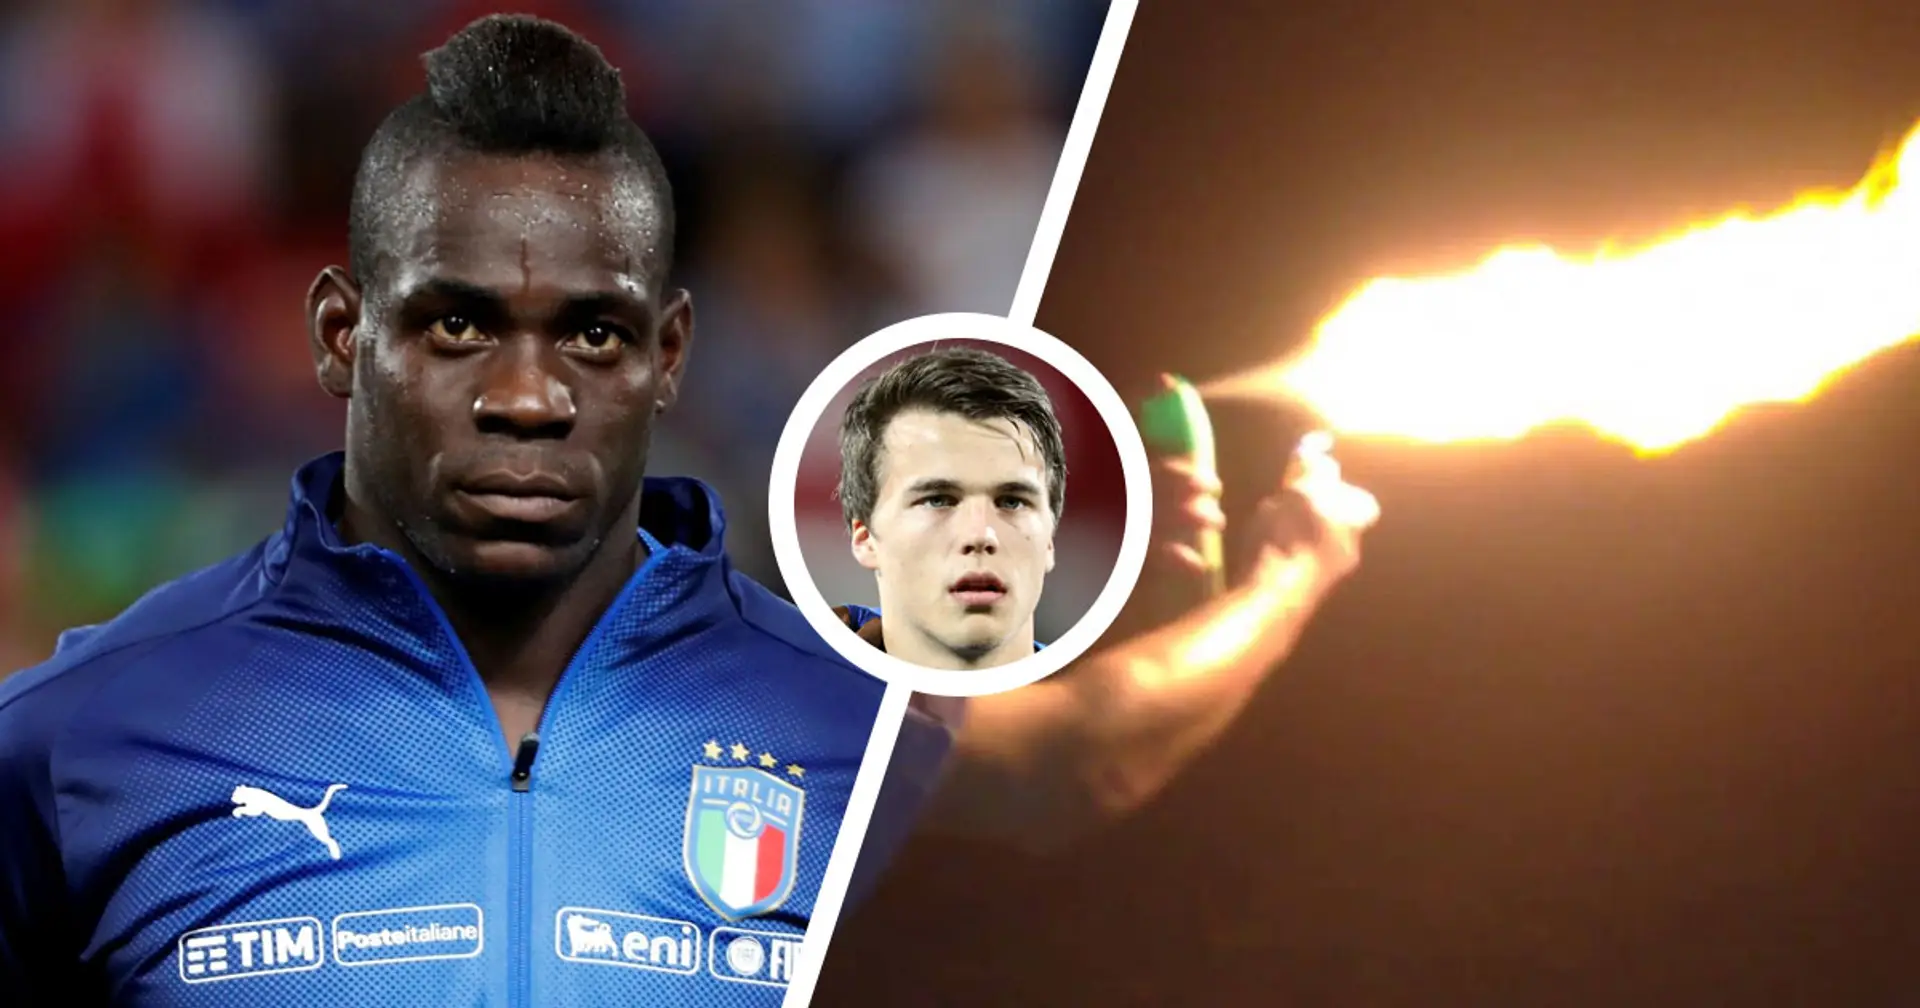 'Balotelli used to chase people with a lighter and spray to try setting them on fire' – Brescia midfielder Skrabb